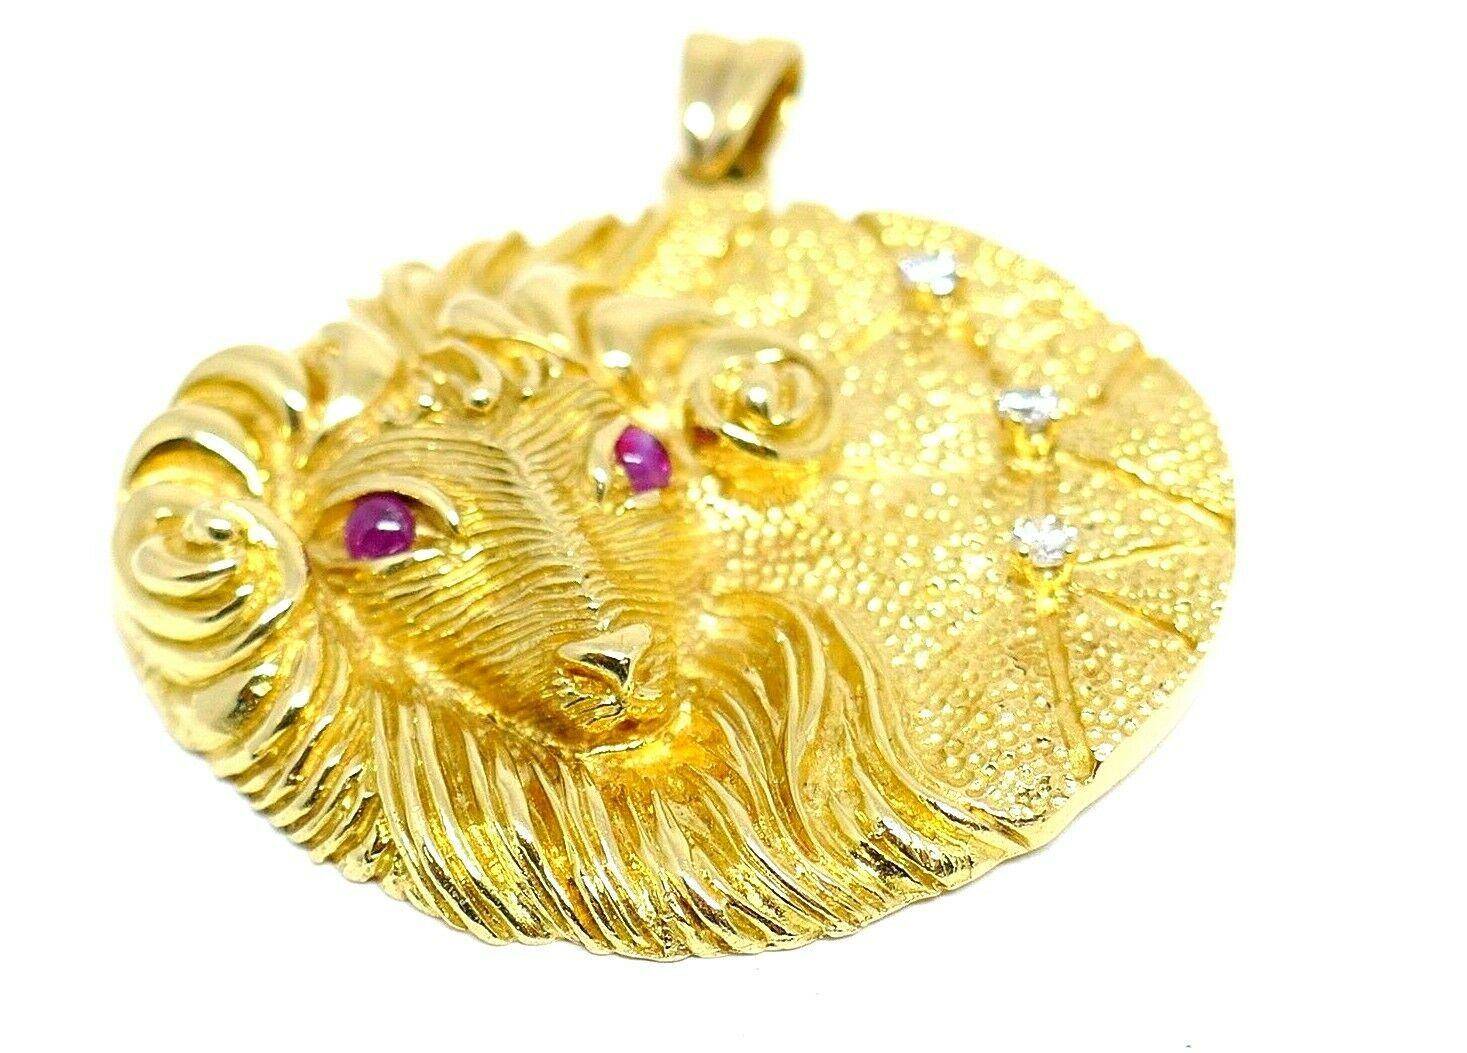 Aries astrological medallion pendant by Carl F. Bucherer. Made of hammered 18k yellow gold features diamond and tourmaline.
Diameter is 1.5